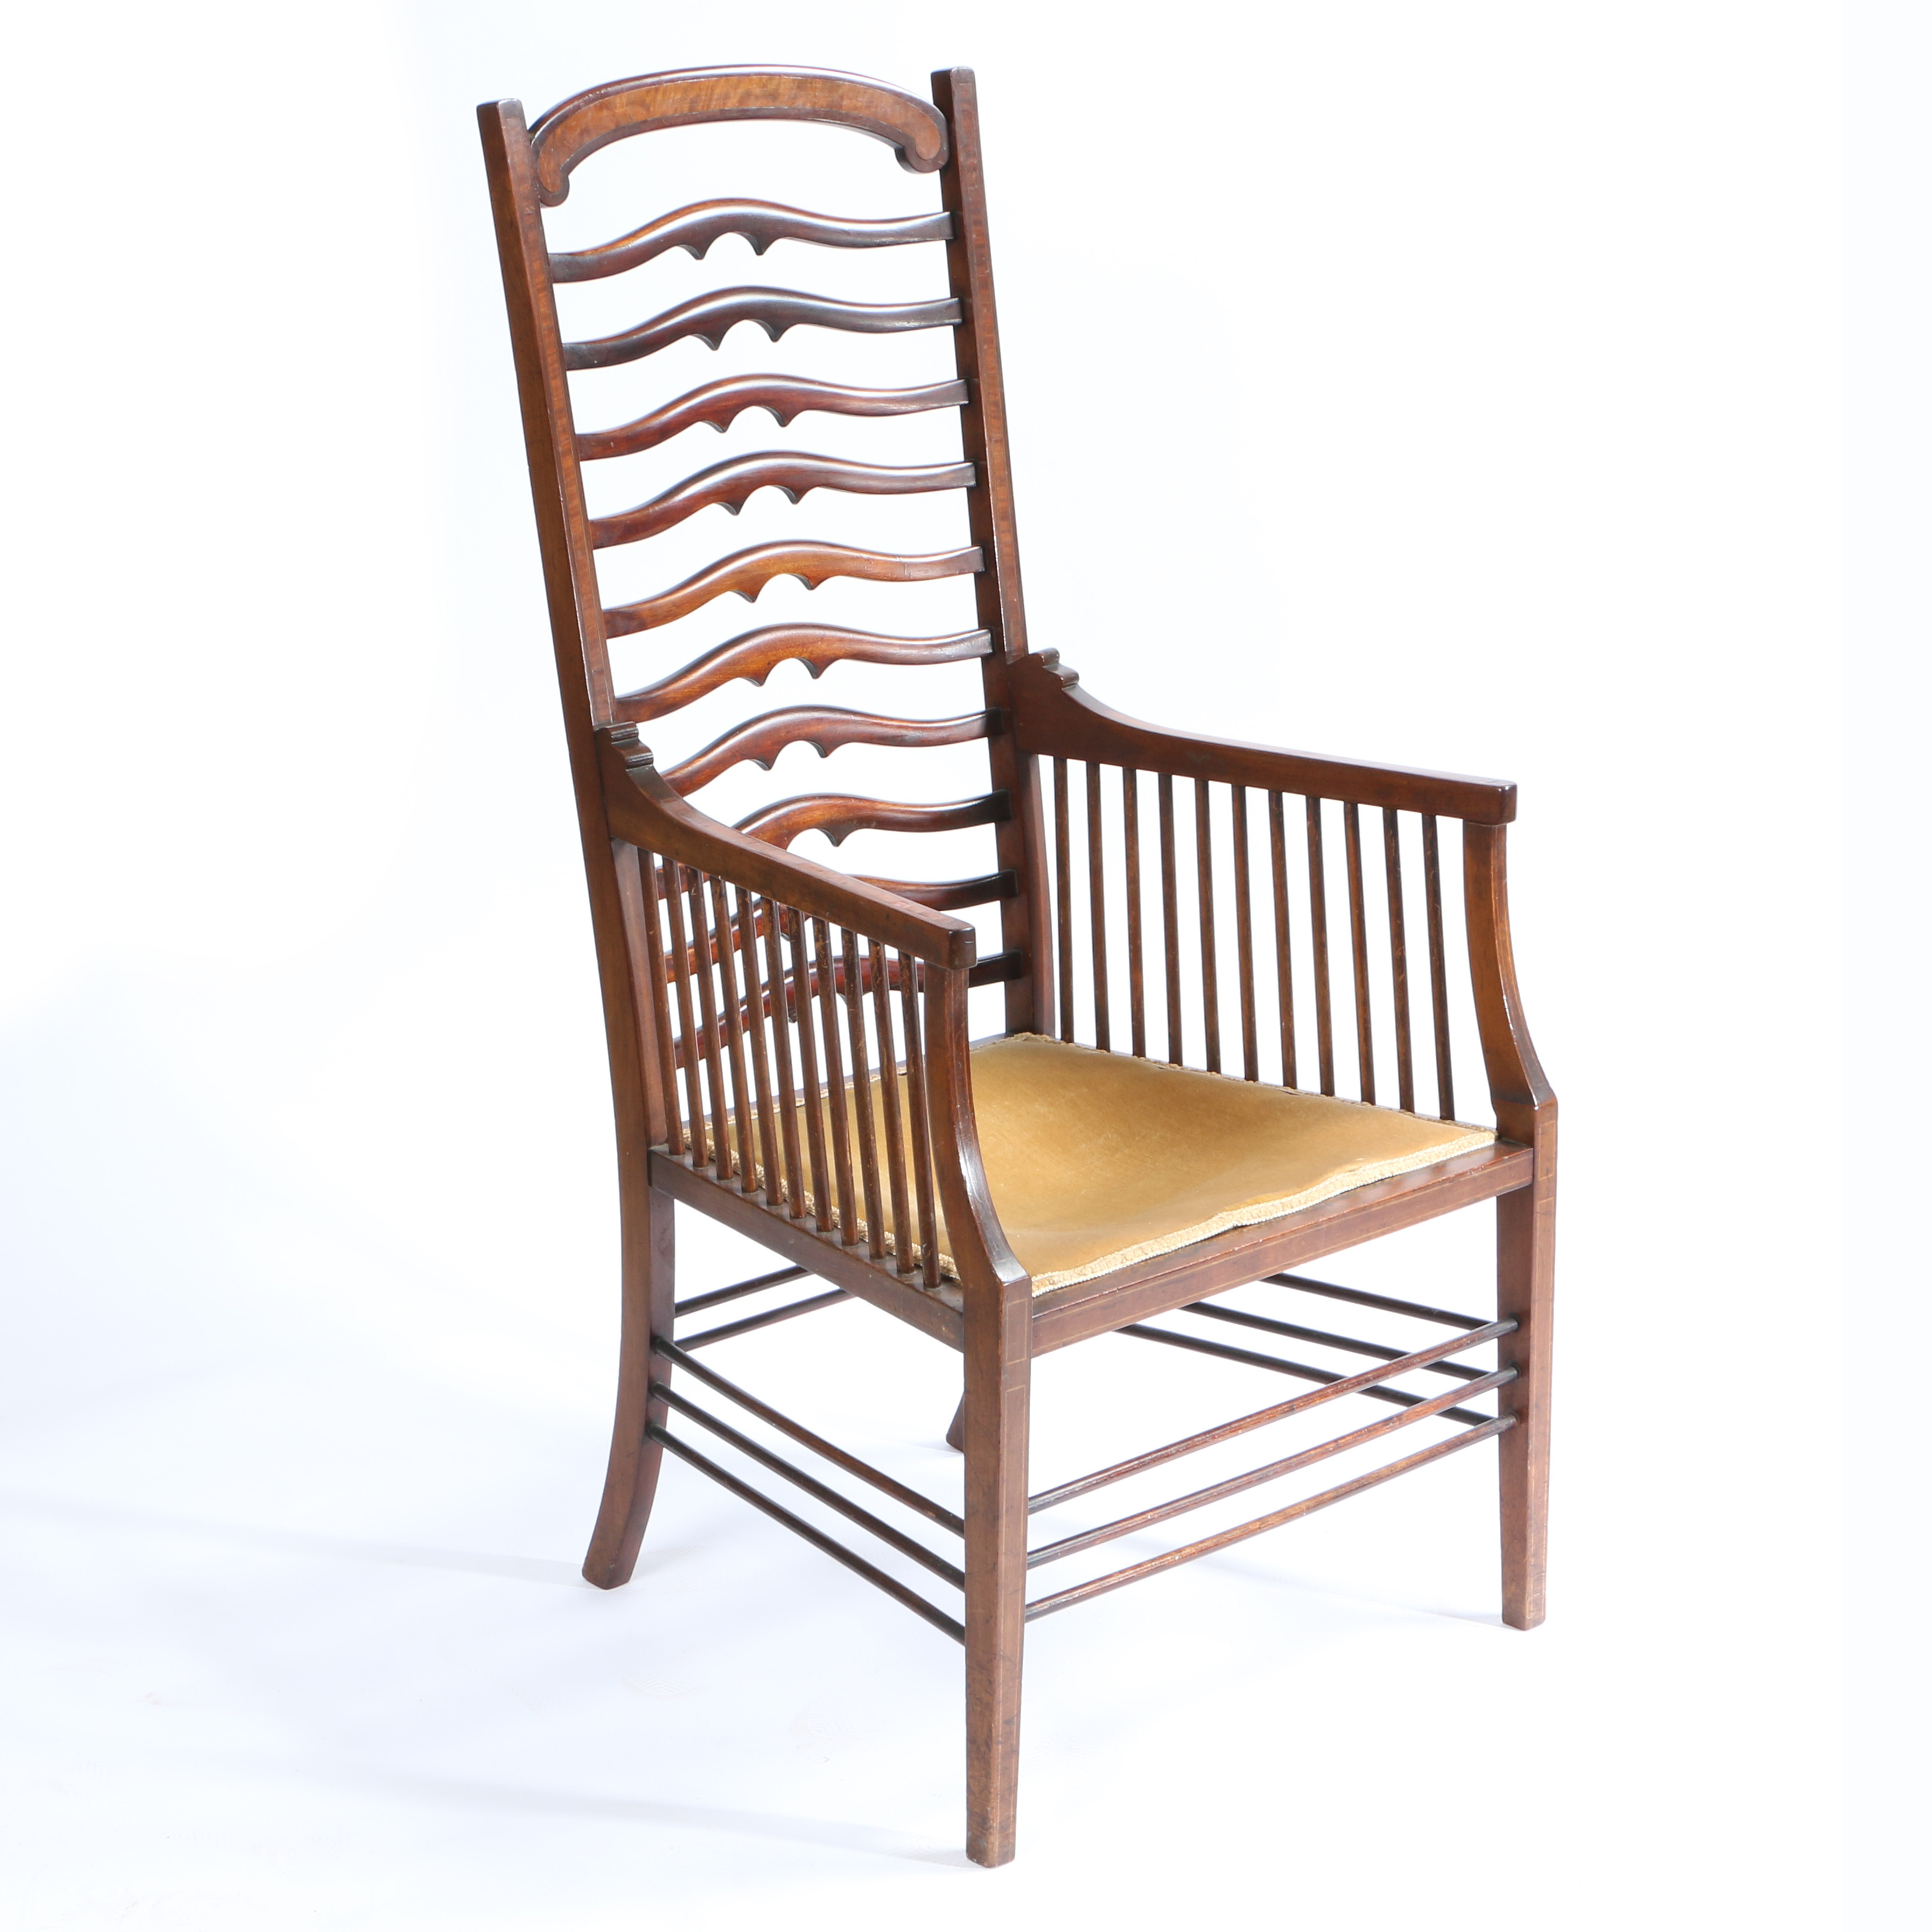 AN ARTS AND CRAFTS LADDER BACK CHAIR. - Image 2 of 4